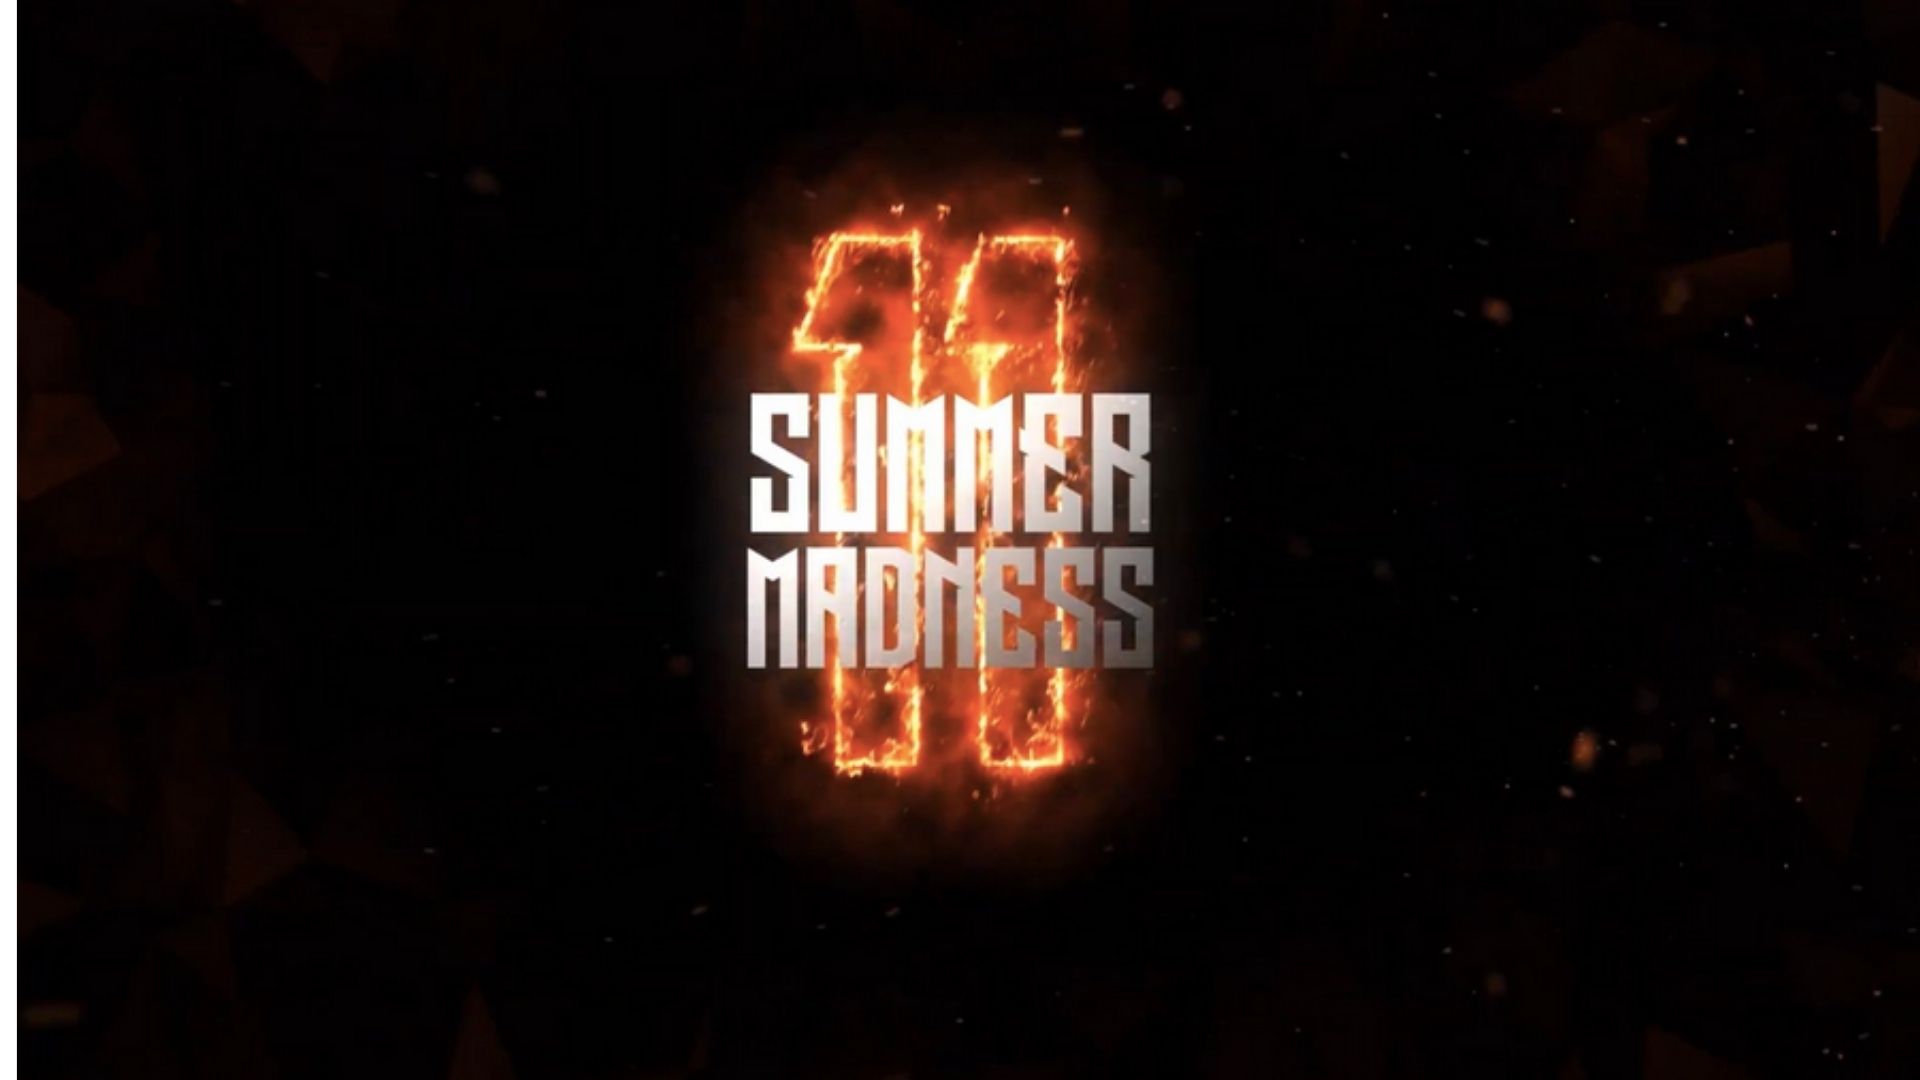 The URL Announces Summer Madness 11 & Its Return to Houston